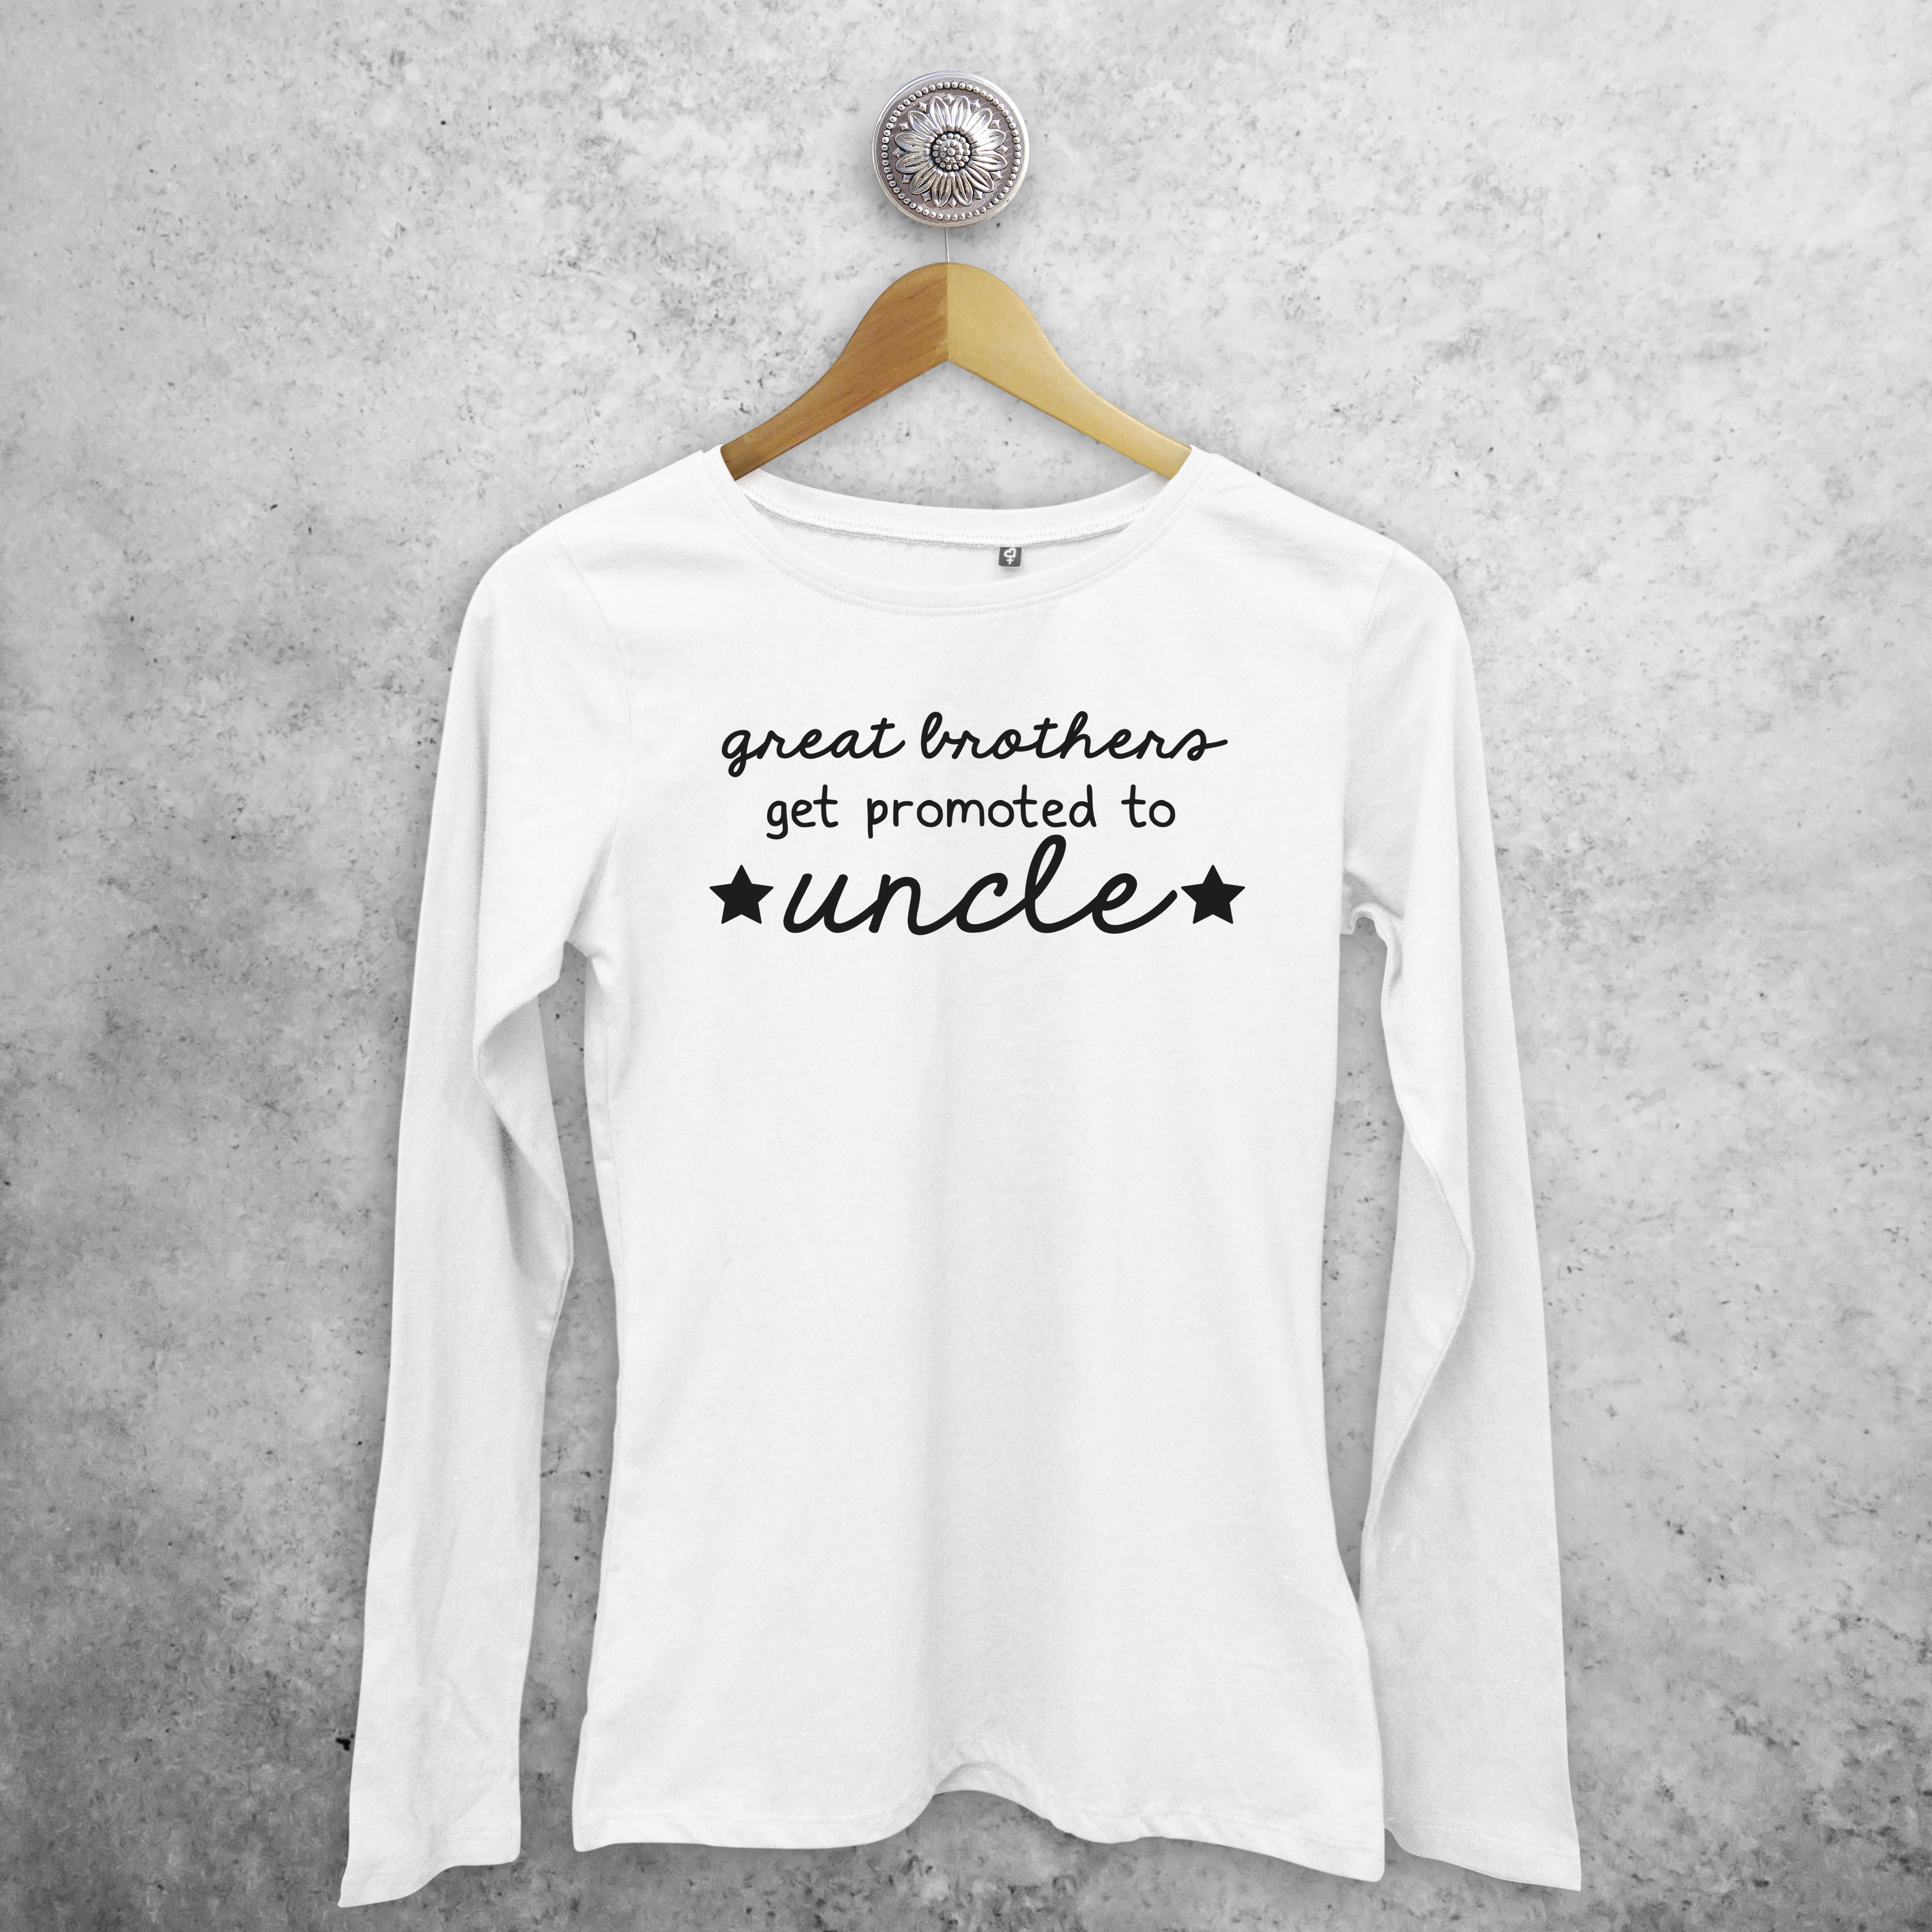 'Great brothers get promoted to uncle' adult longsleeve shirt